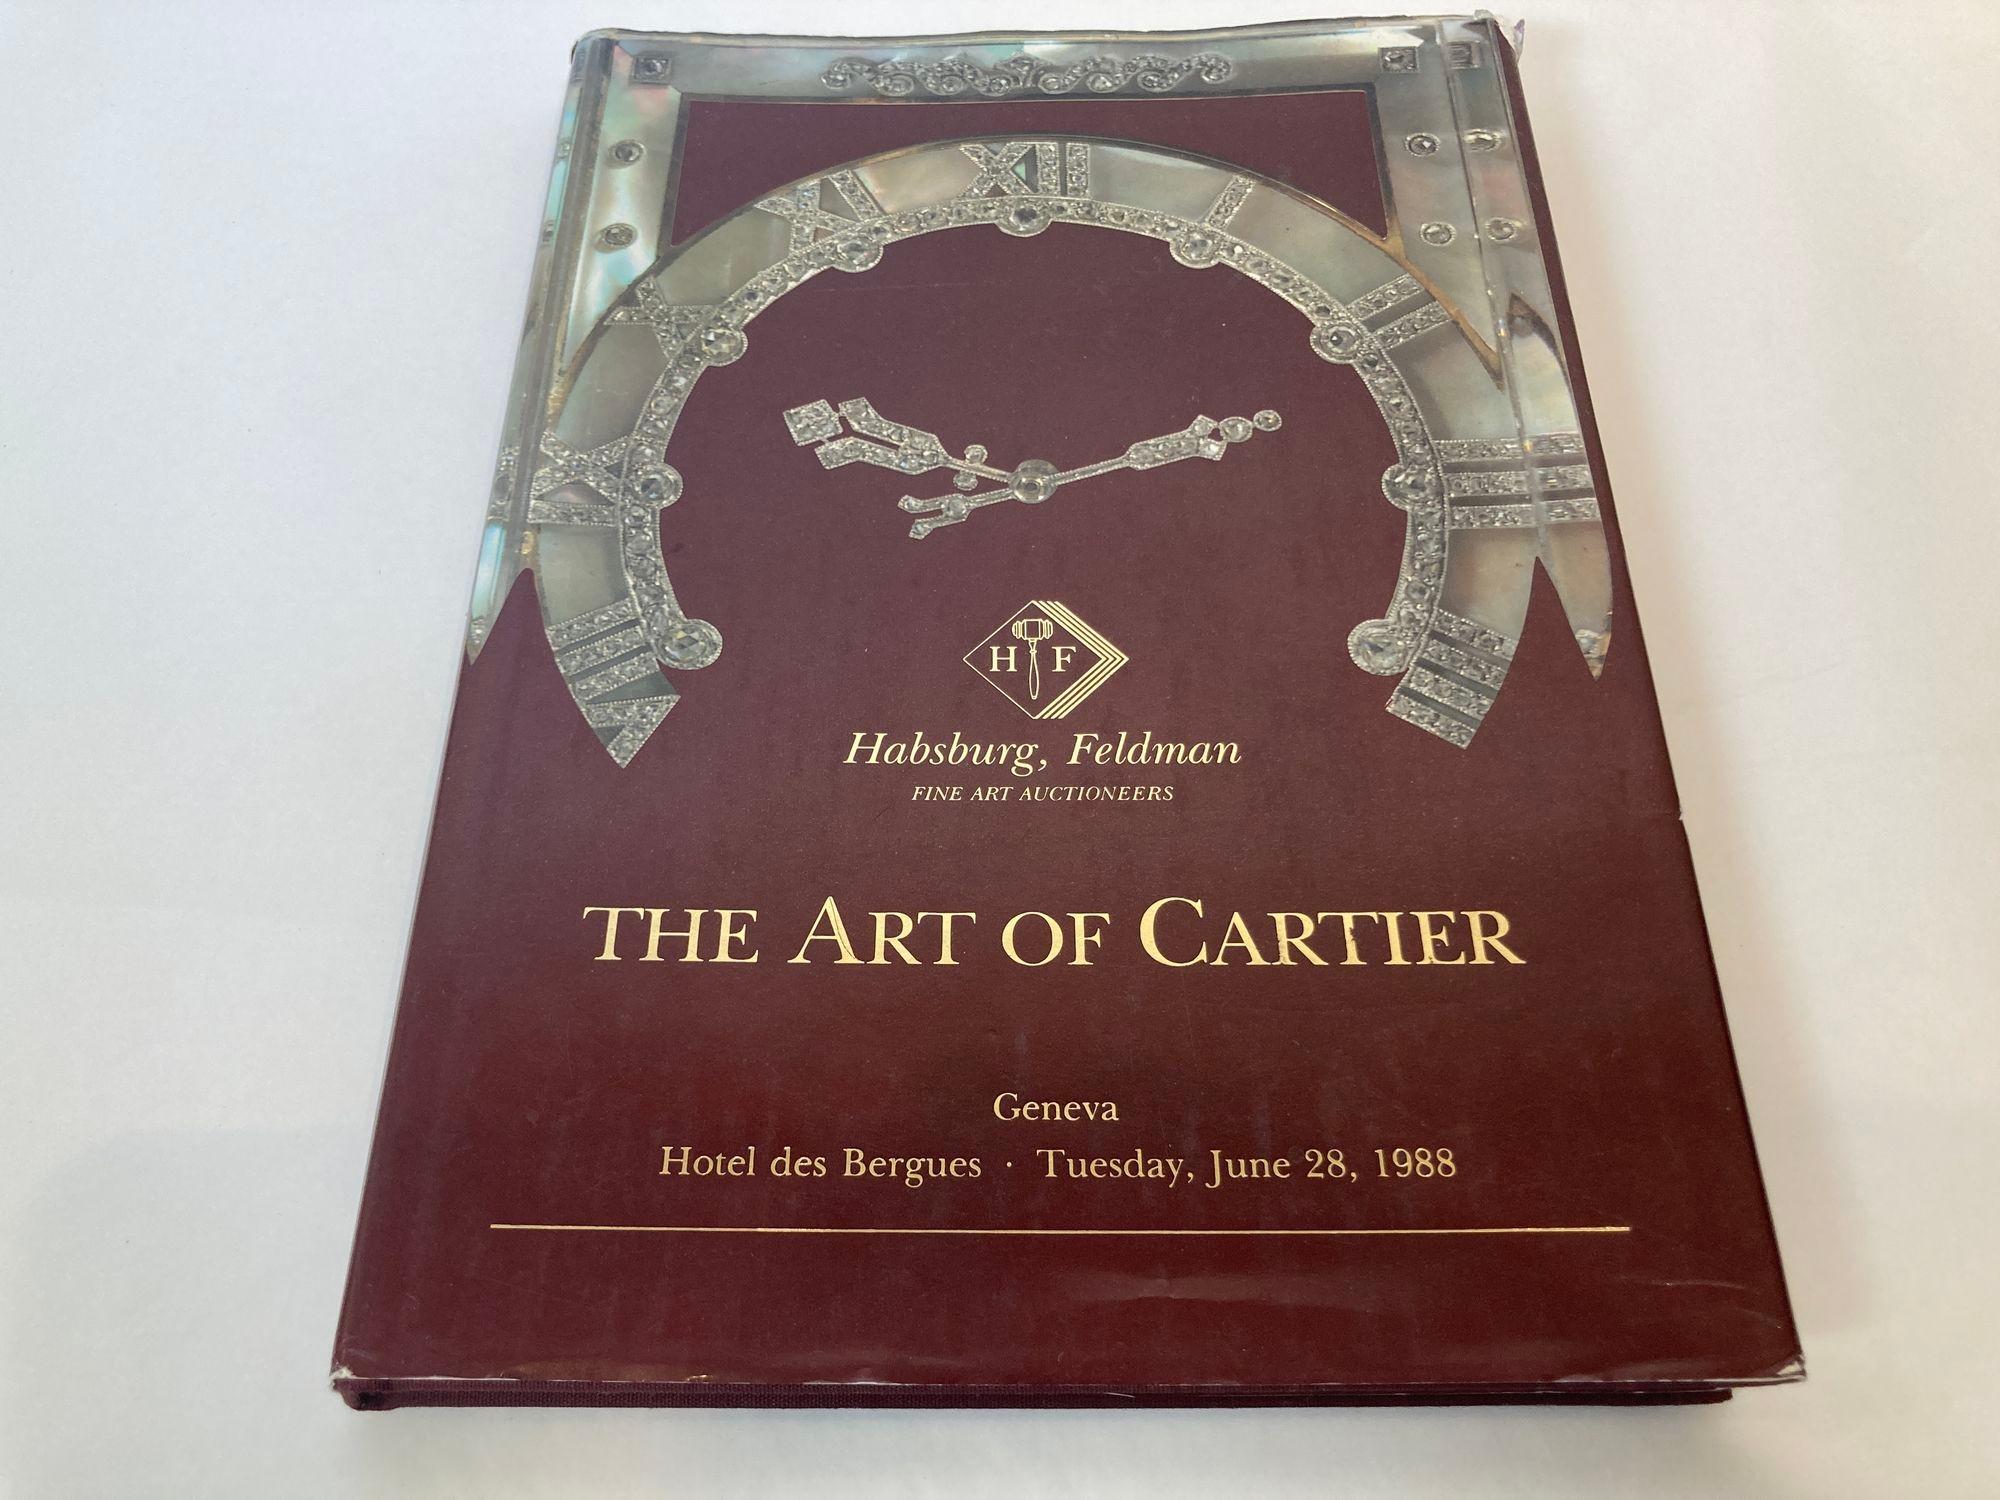 The Art of Cartier 1988 Genf Auktions-Hardcoverbuch im Angebot 11